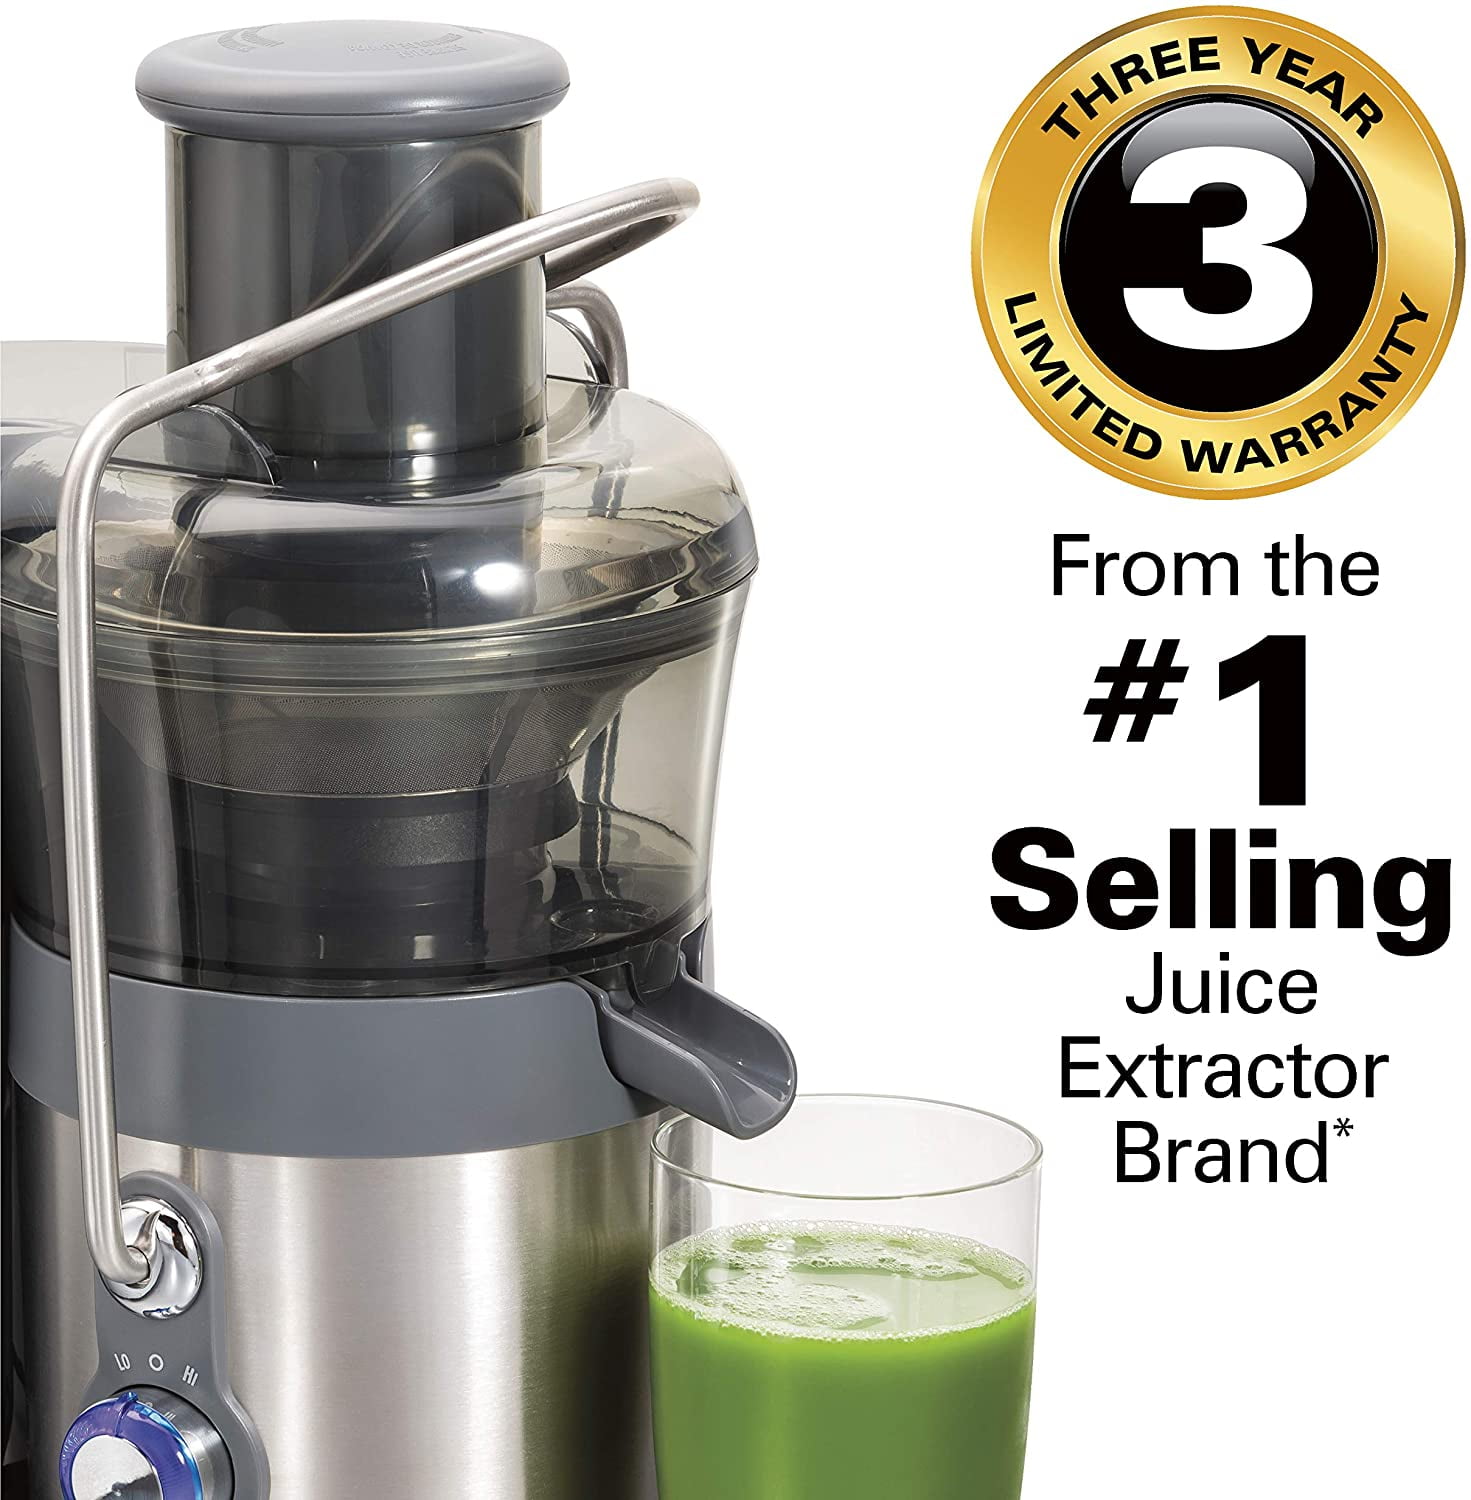 Hamilton Beach Juicer Machine Big Mouth 3 Feed Chute - health and beauty -  by owner - household sale - craigslist